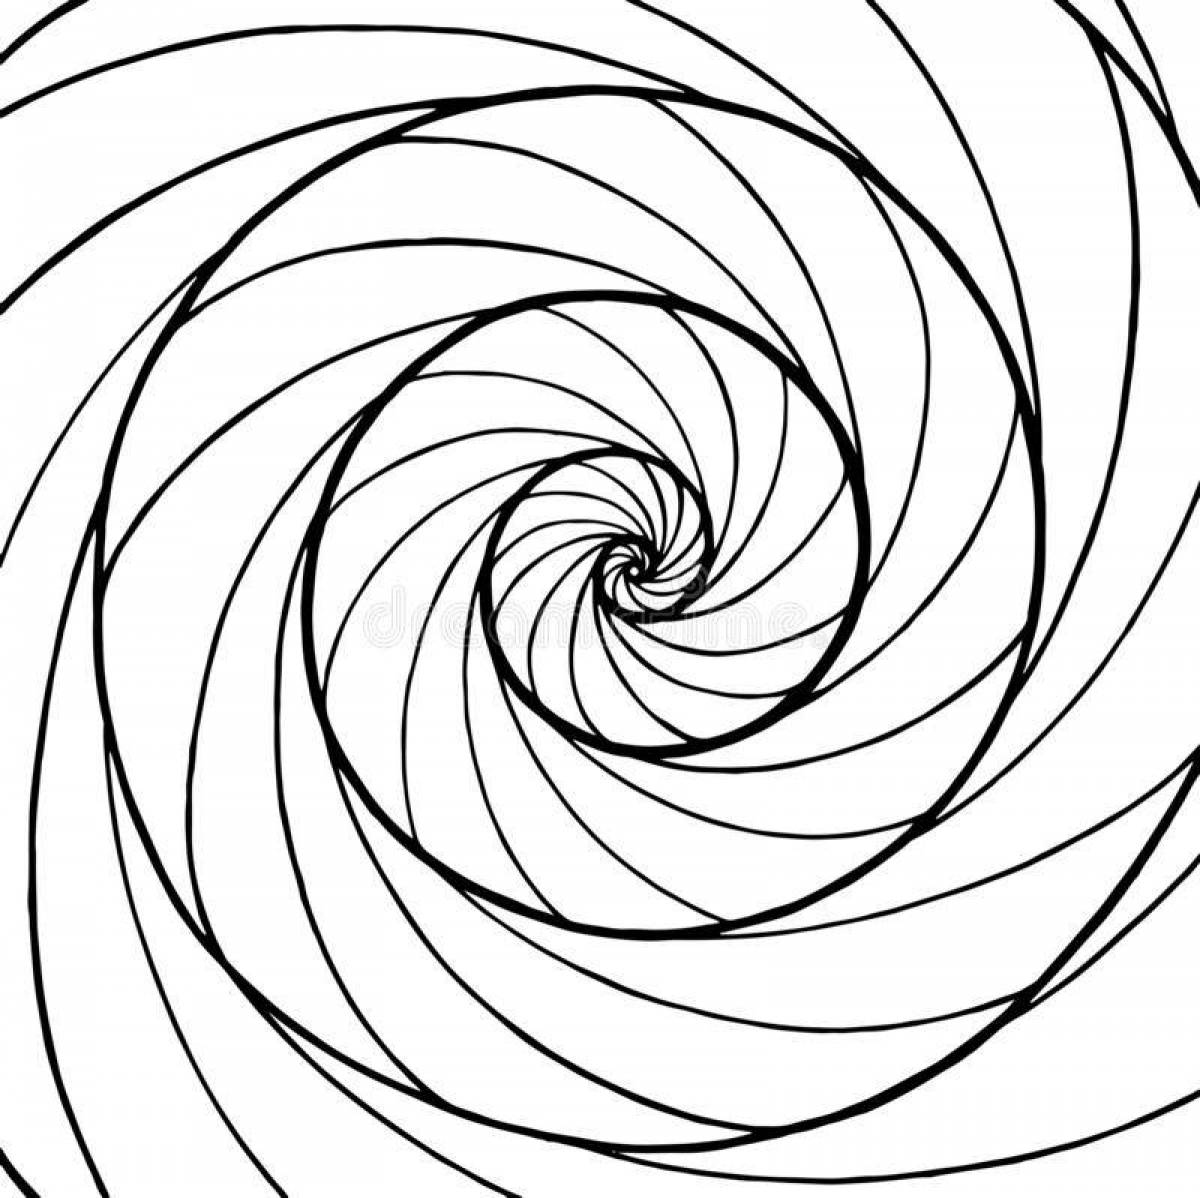 Coloring page for a spectacular spiral pattern